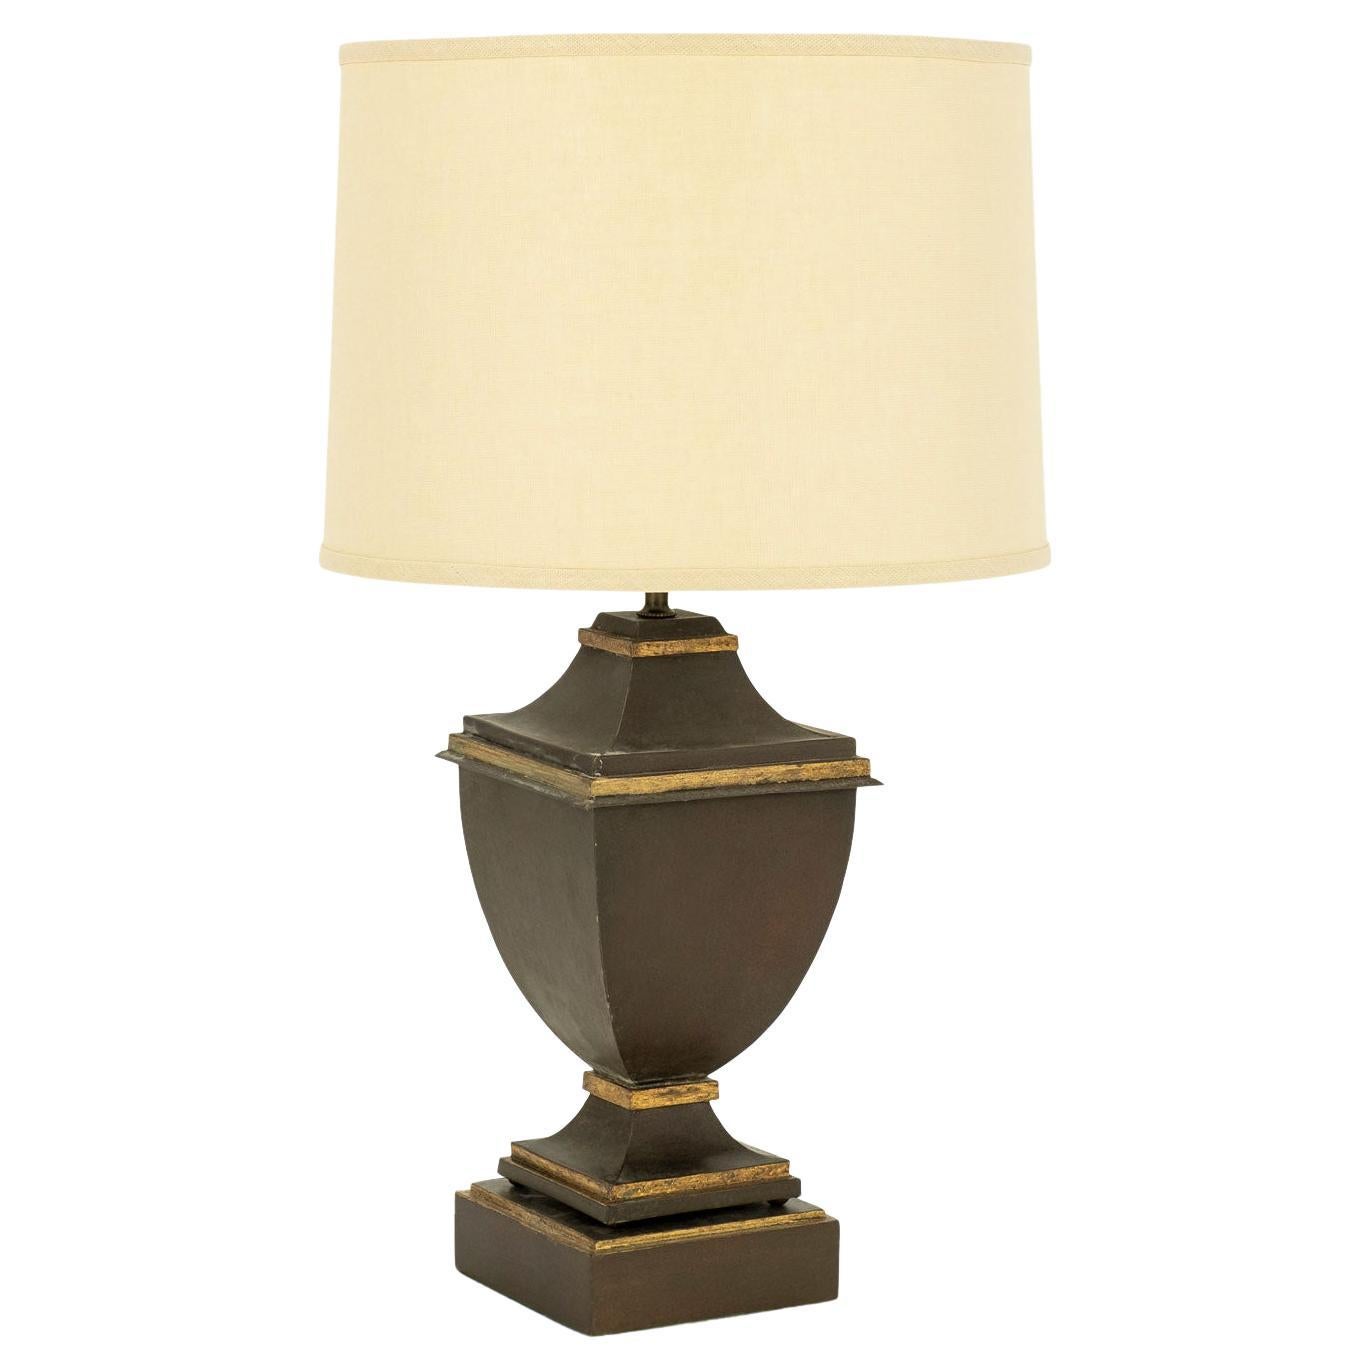 Urn-Shape Tole Table Lamp For Sale